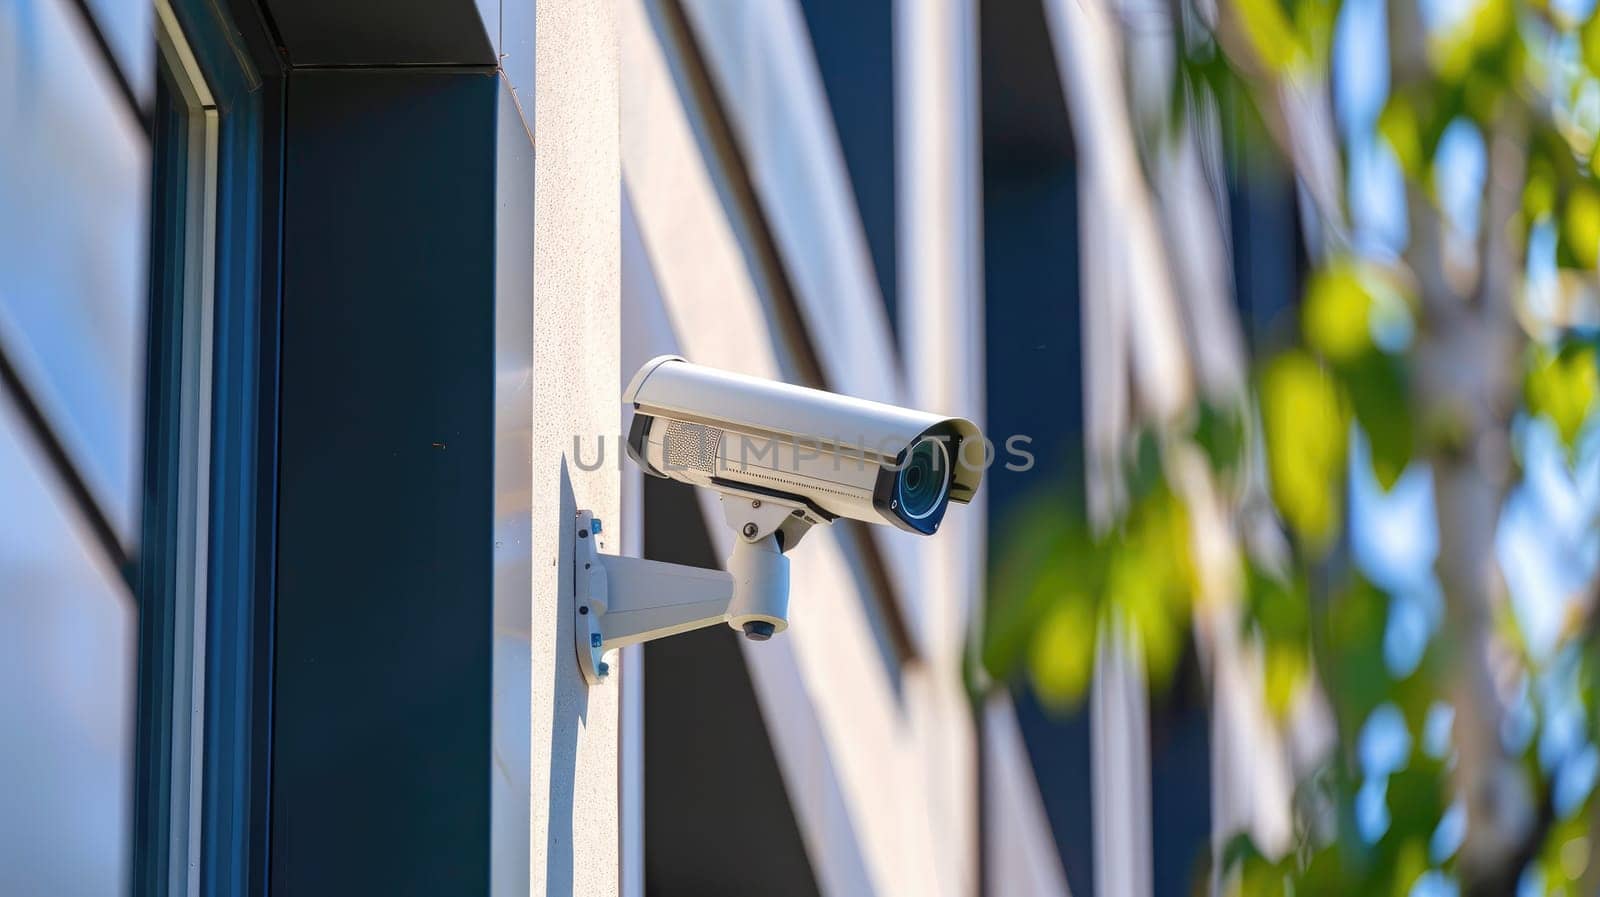 A security camera is mounted on a building, Home security and Smart home concept.